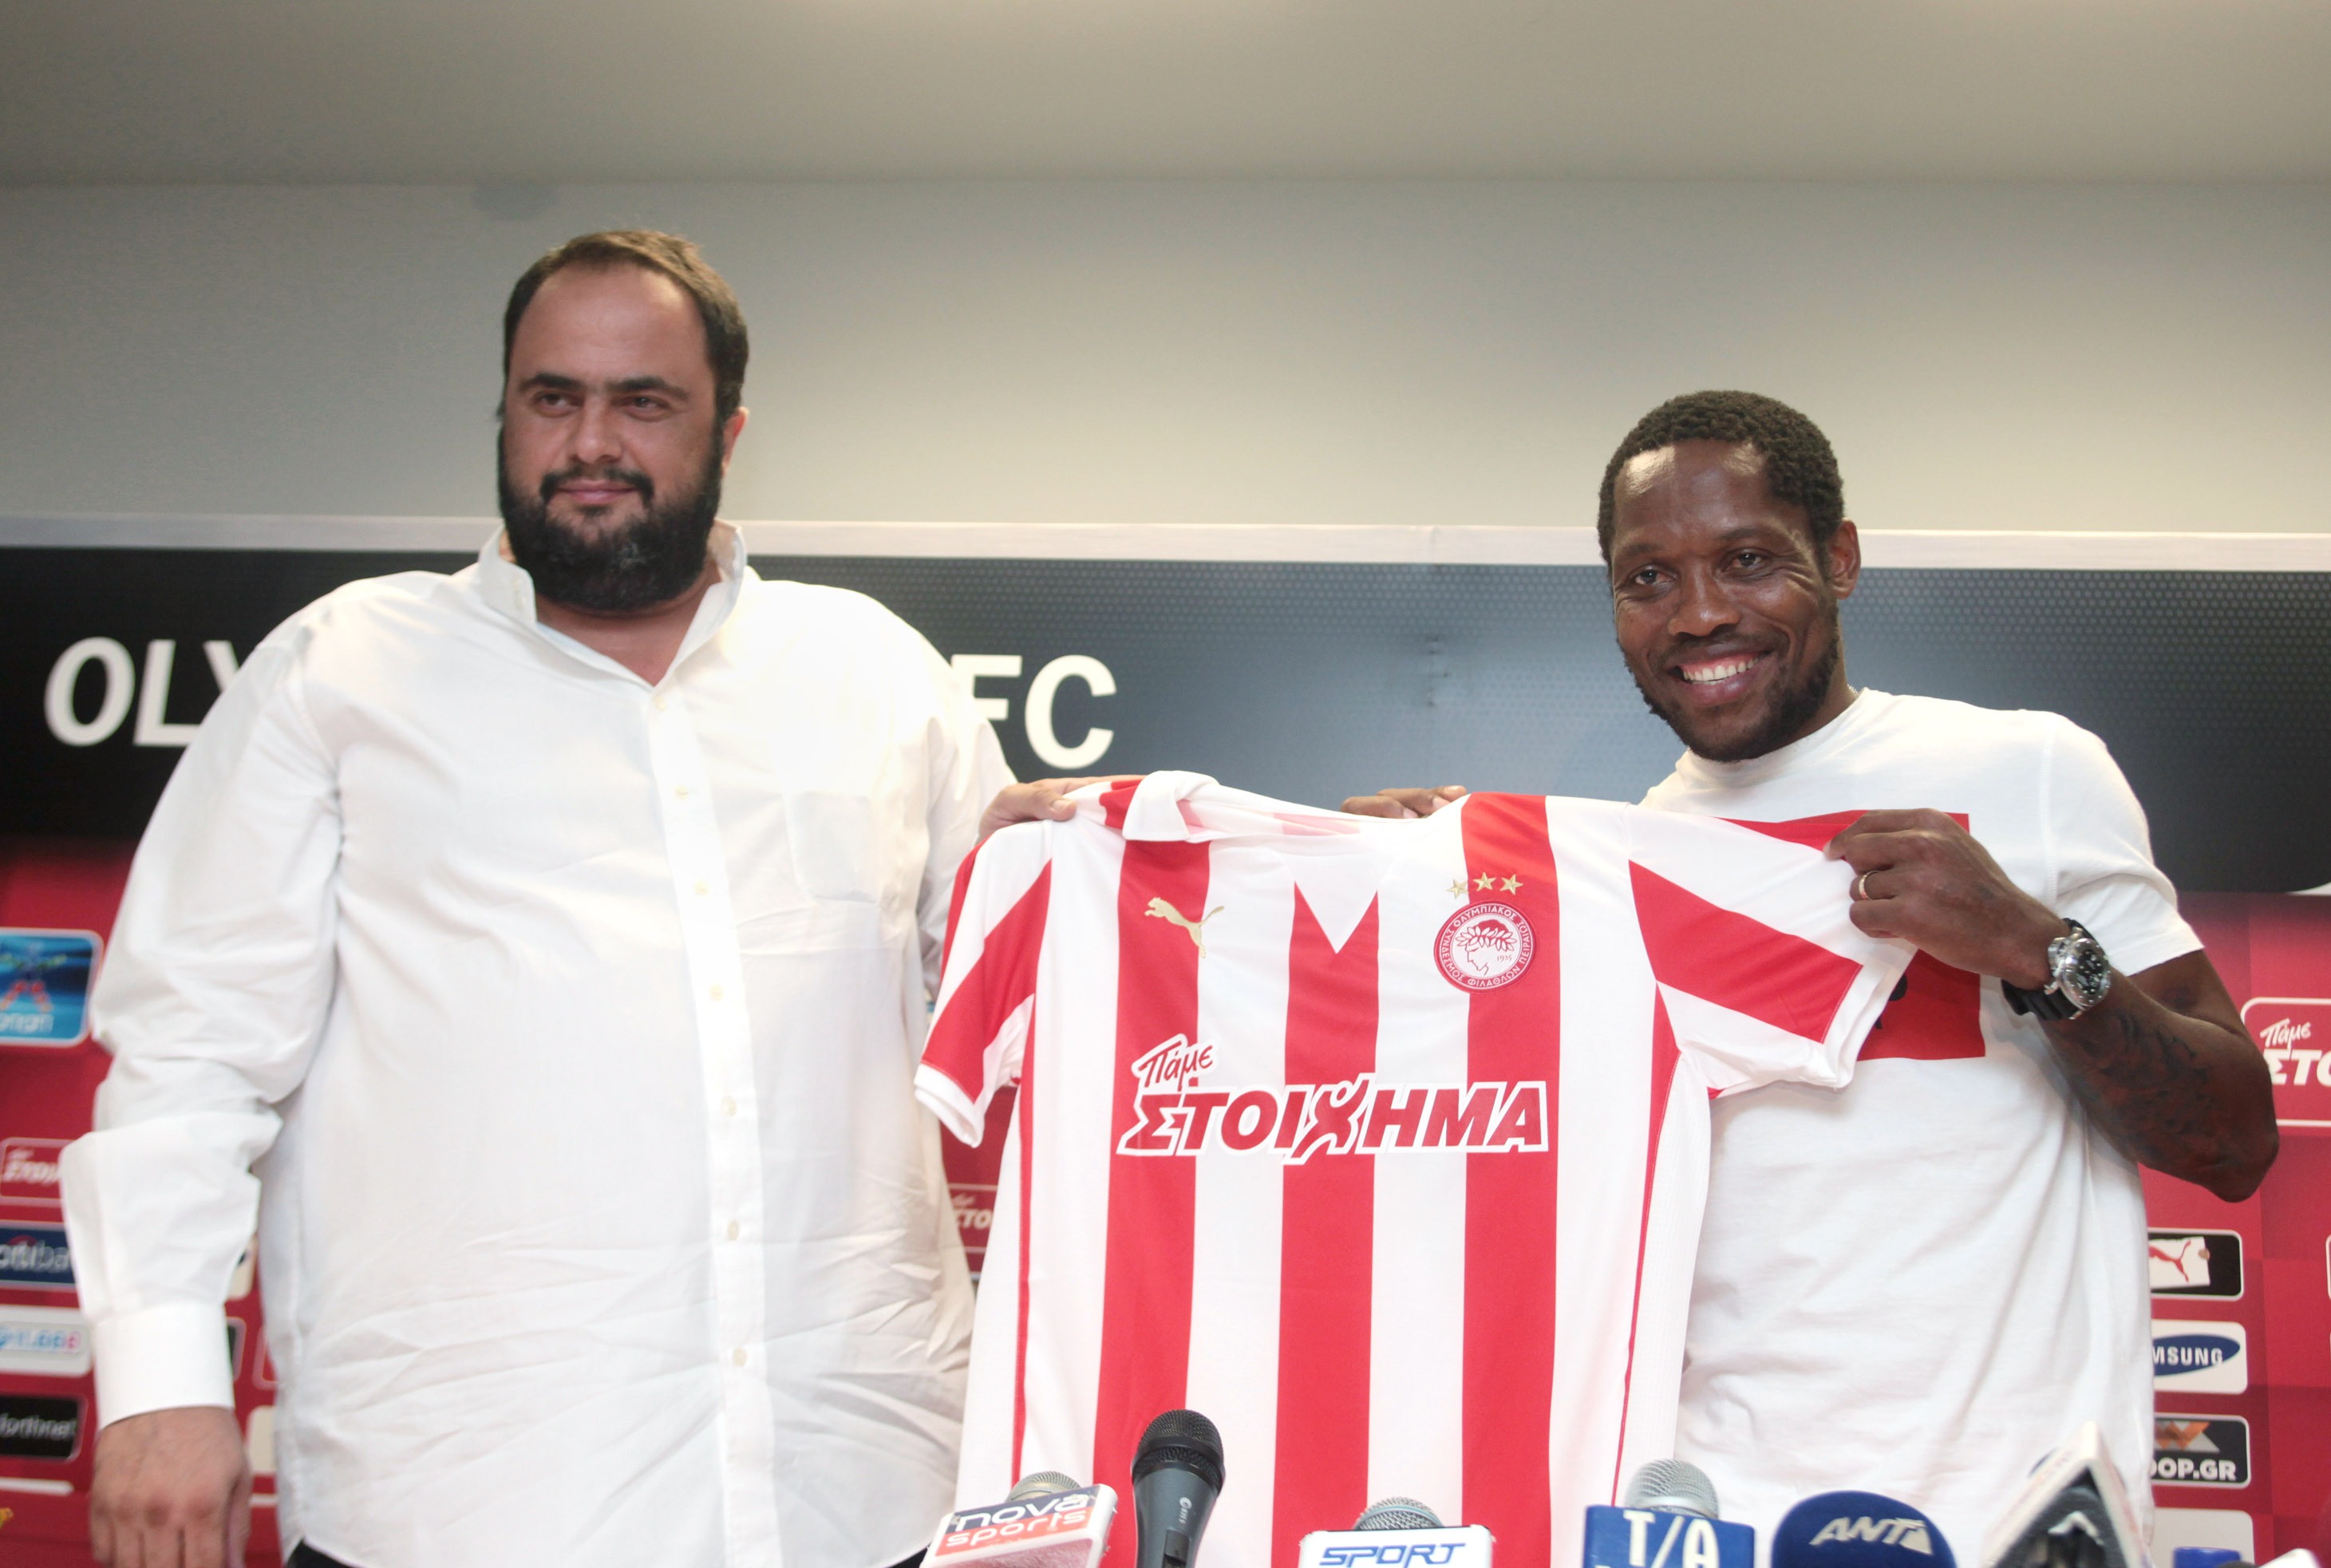 Evangelos Marinakis: “Put on an even greater spectacle with players like Jean Makoun”